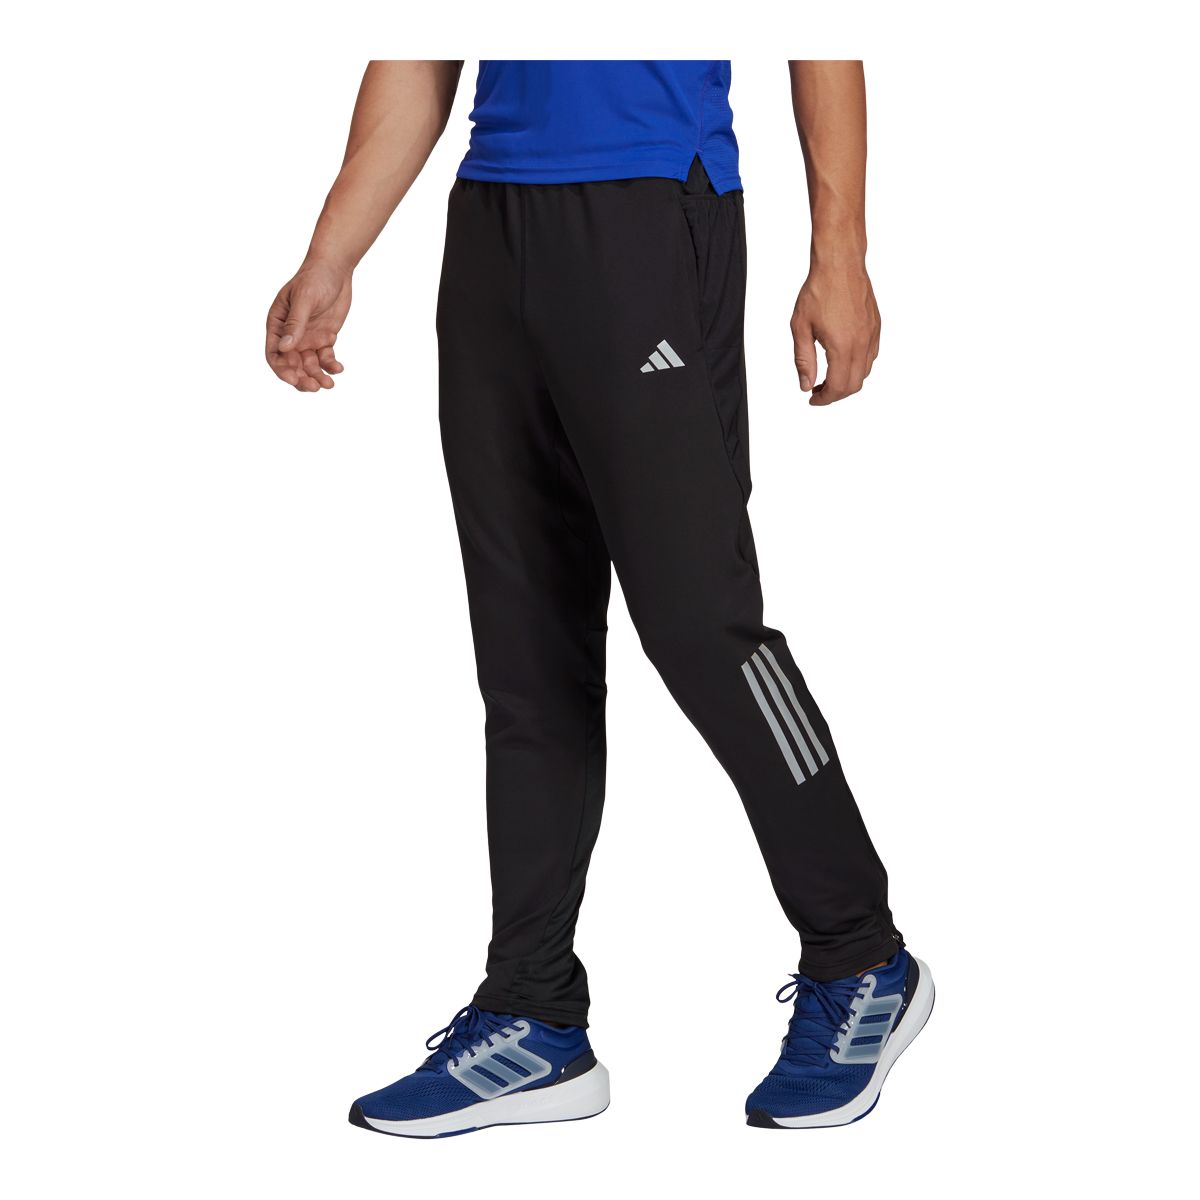 Image of adidas Men's Own The Run Astro Knit Pants